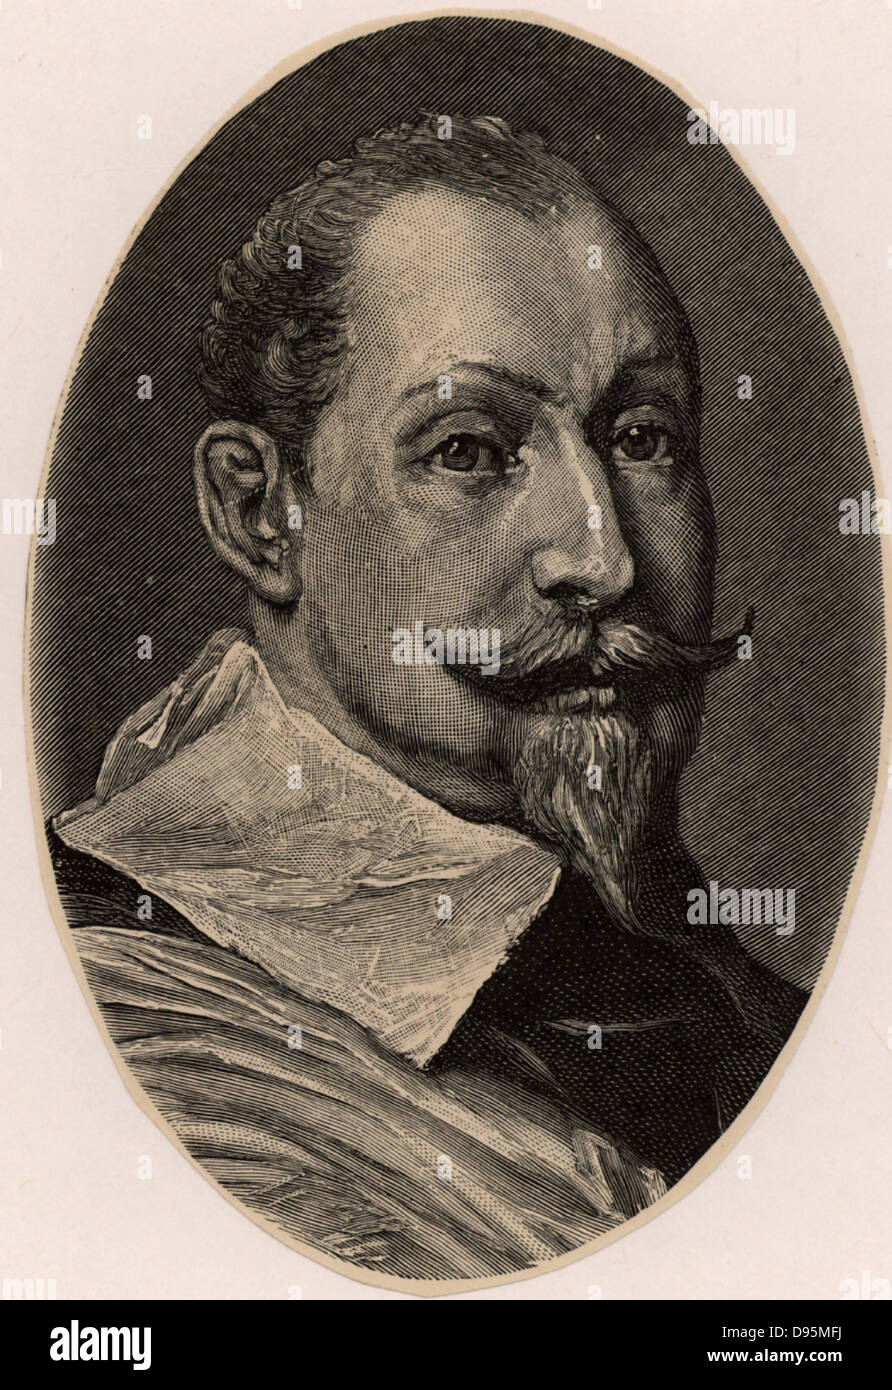 Gustavus Adolphus (1594-1632) King of Sweden from 1611.  In Thirty Years War (1618-1648) intervened on behalf of Protestants against Catholic League.  Fatally wounded at Lutzen. Engraving. Stock Photo